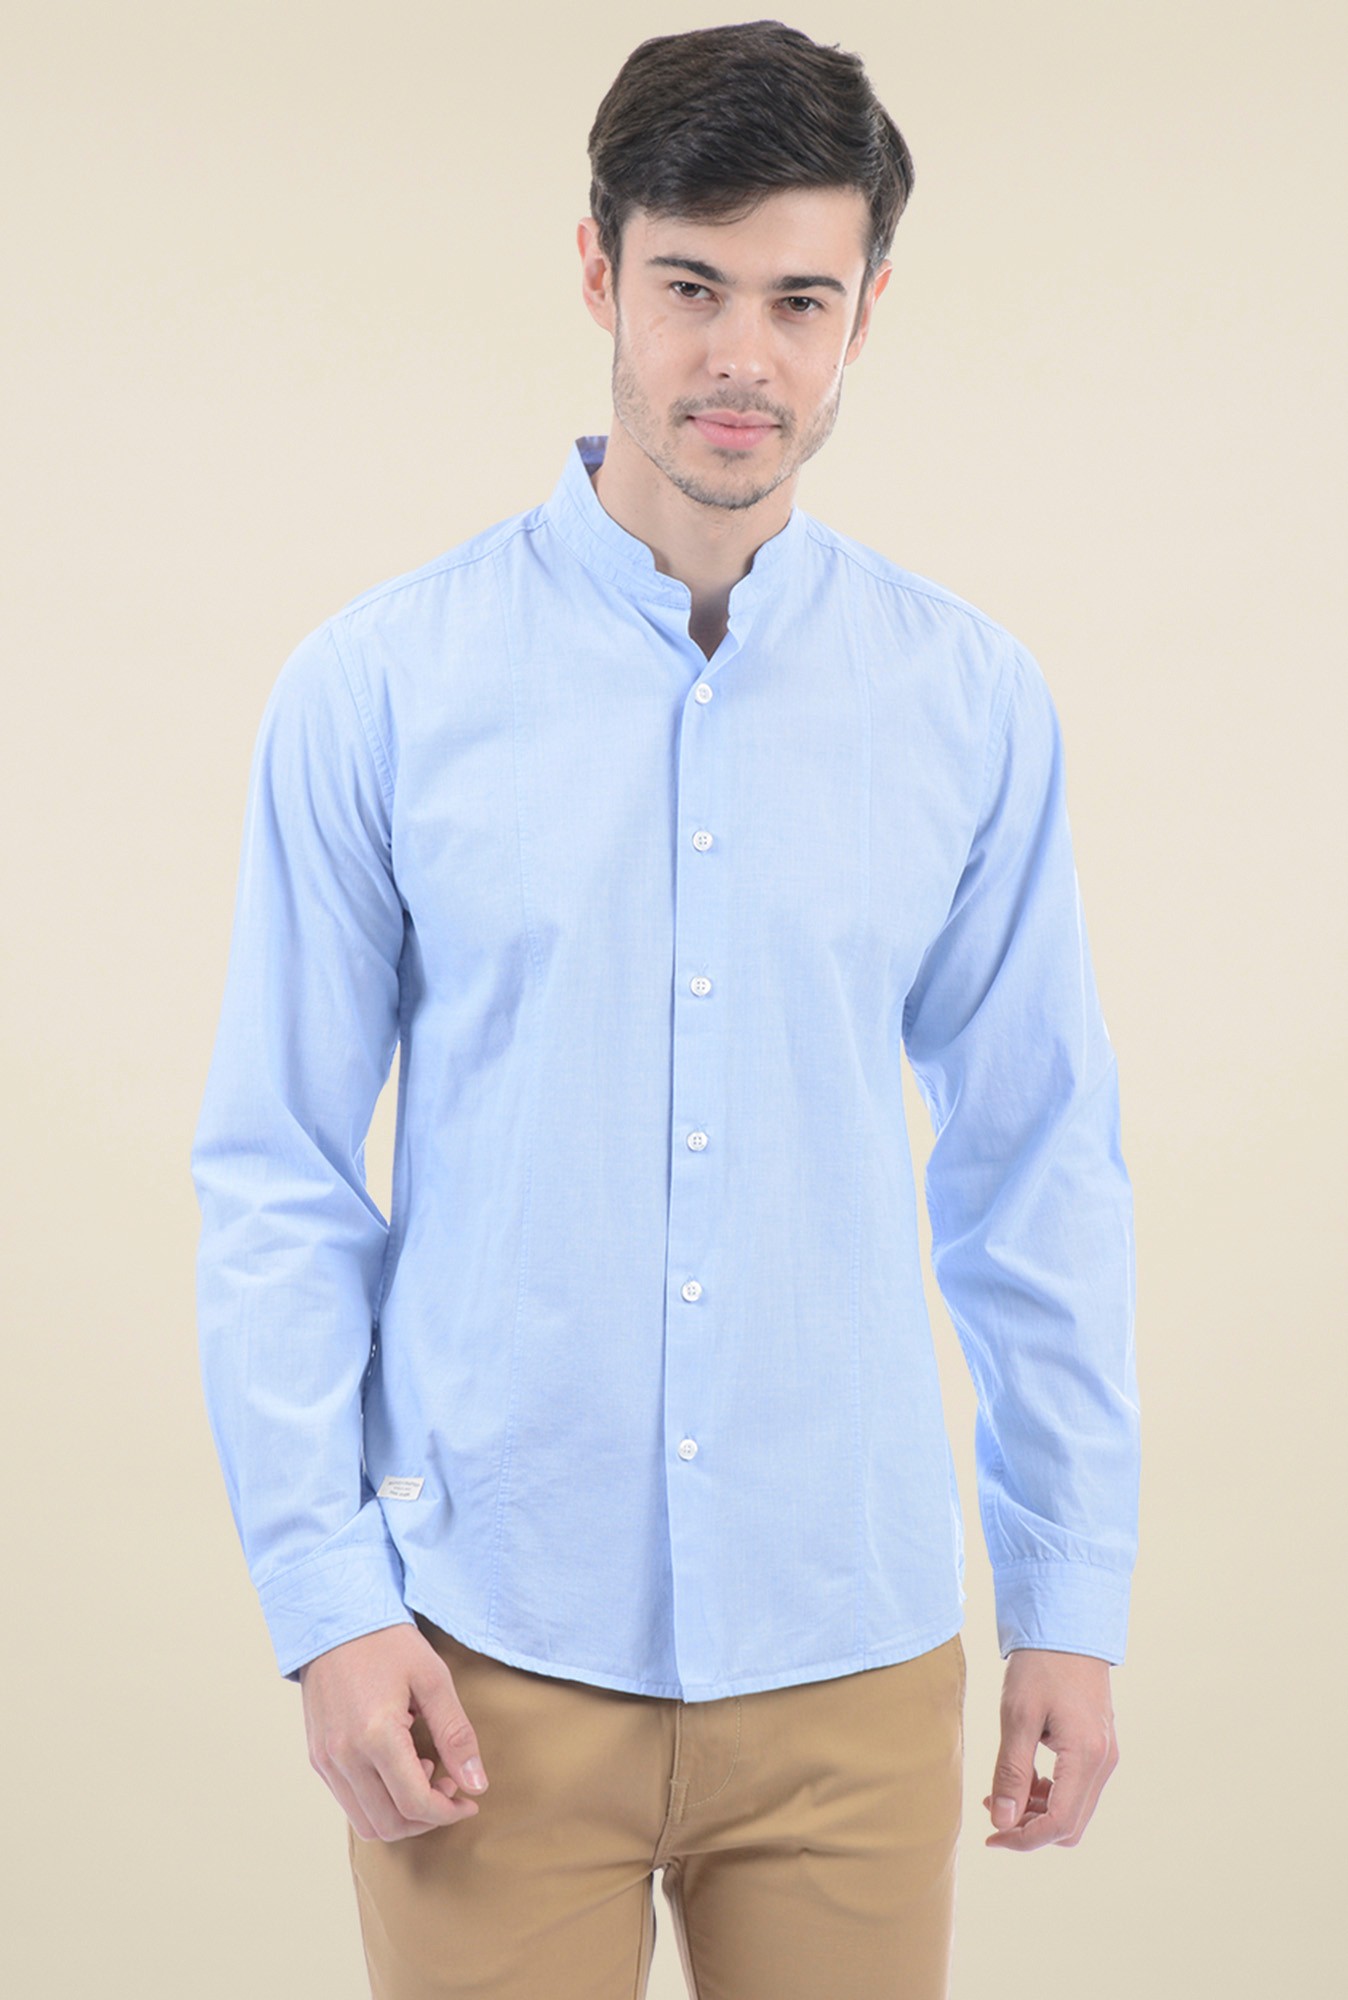 Pepe Jeans Casual Shirt Size Chart